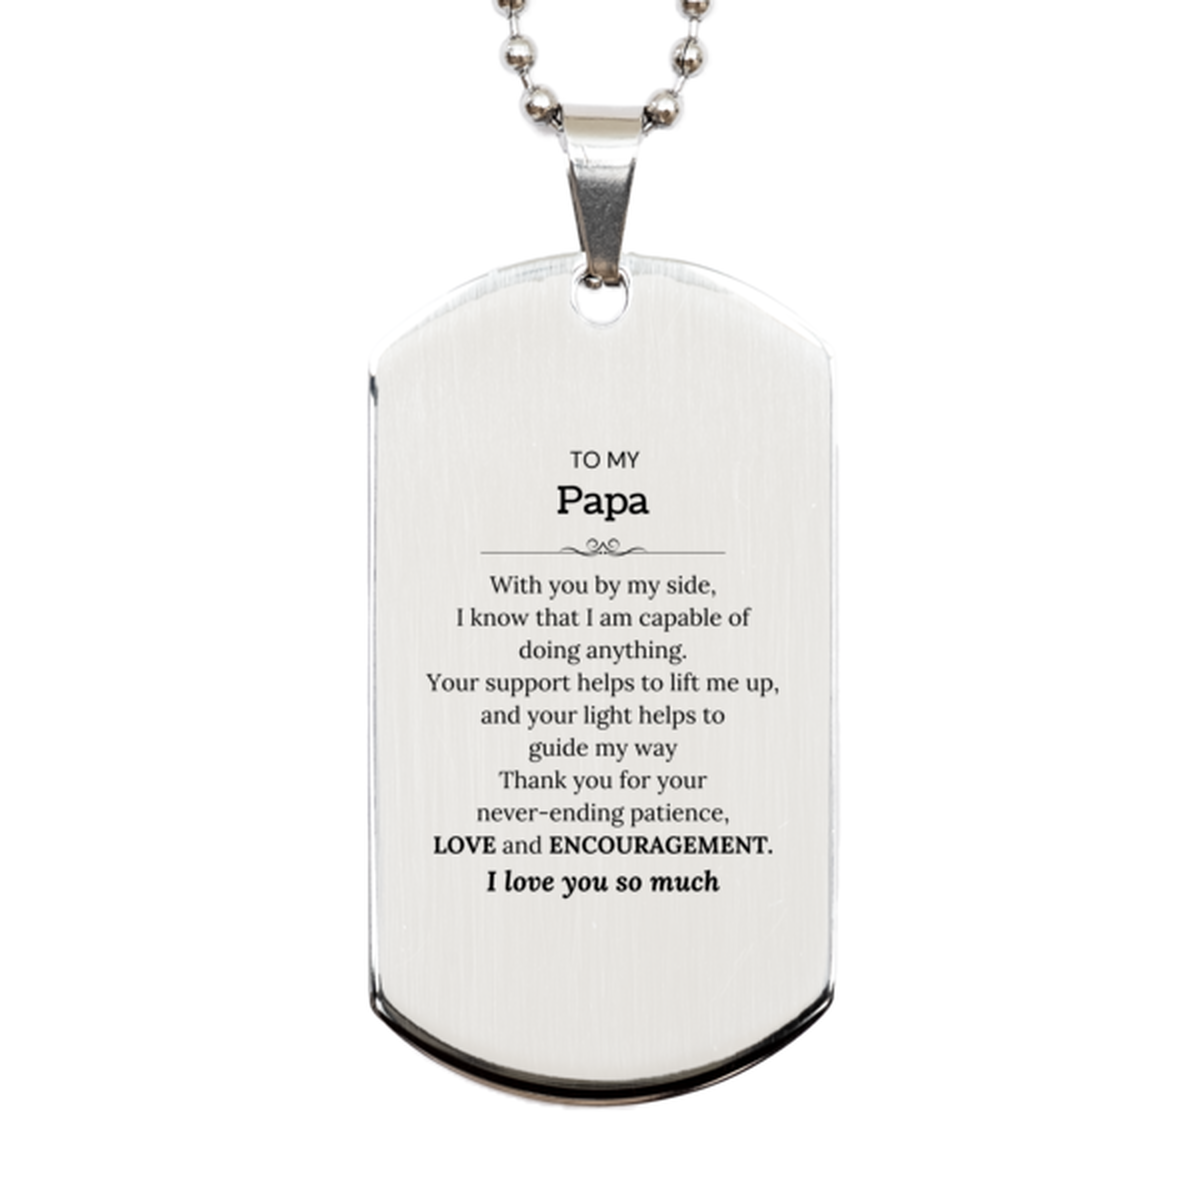 Appreciation Papa Silver Dog Tag Gifts, To My Papa Birthday Christmas Wedding Keepsake Gifts for Papa With you by my side, I know that I am capable of doing anything. I love you so much